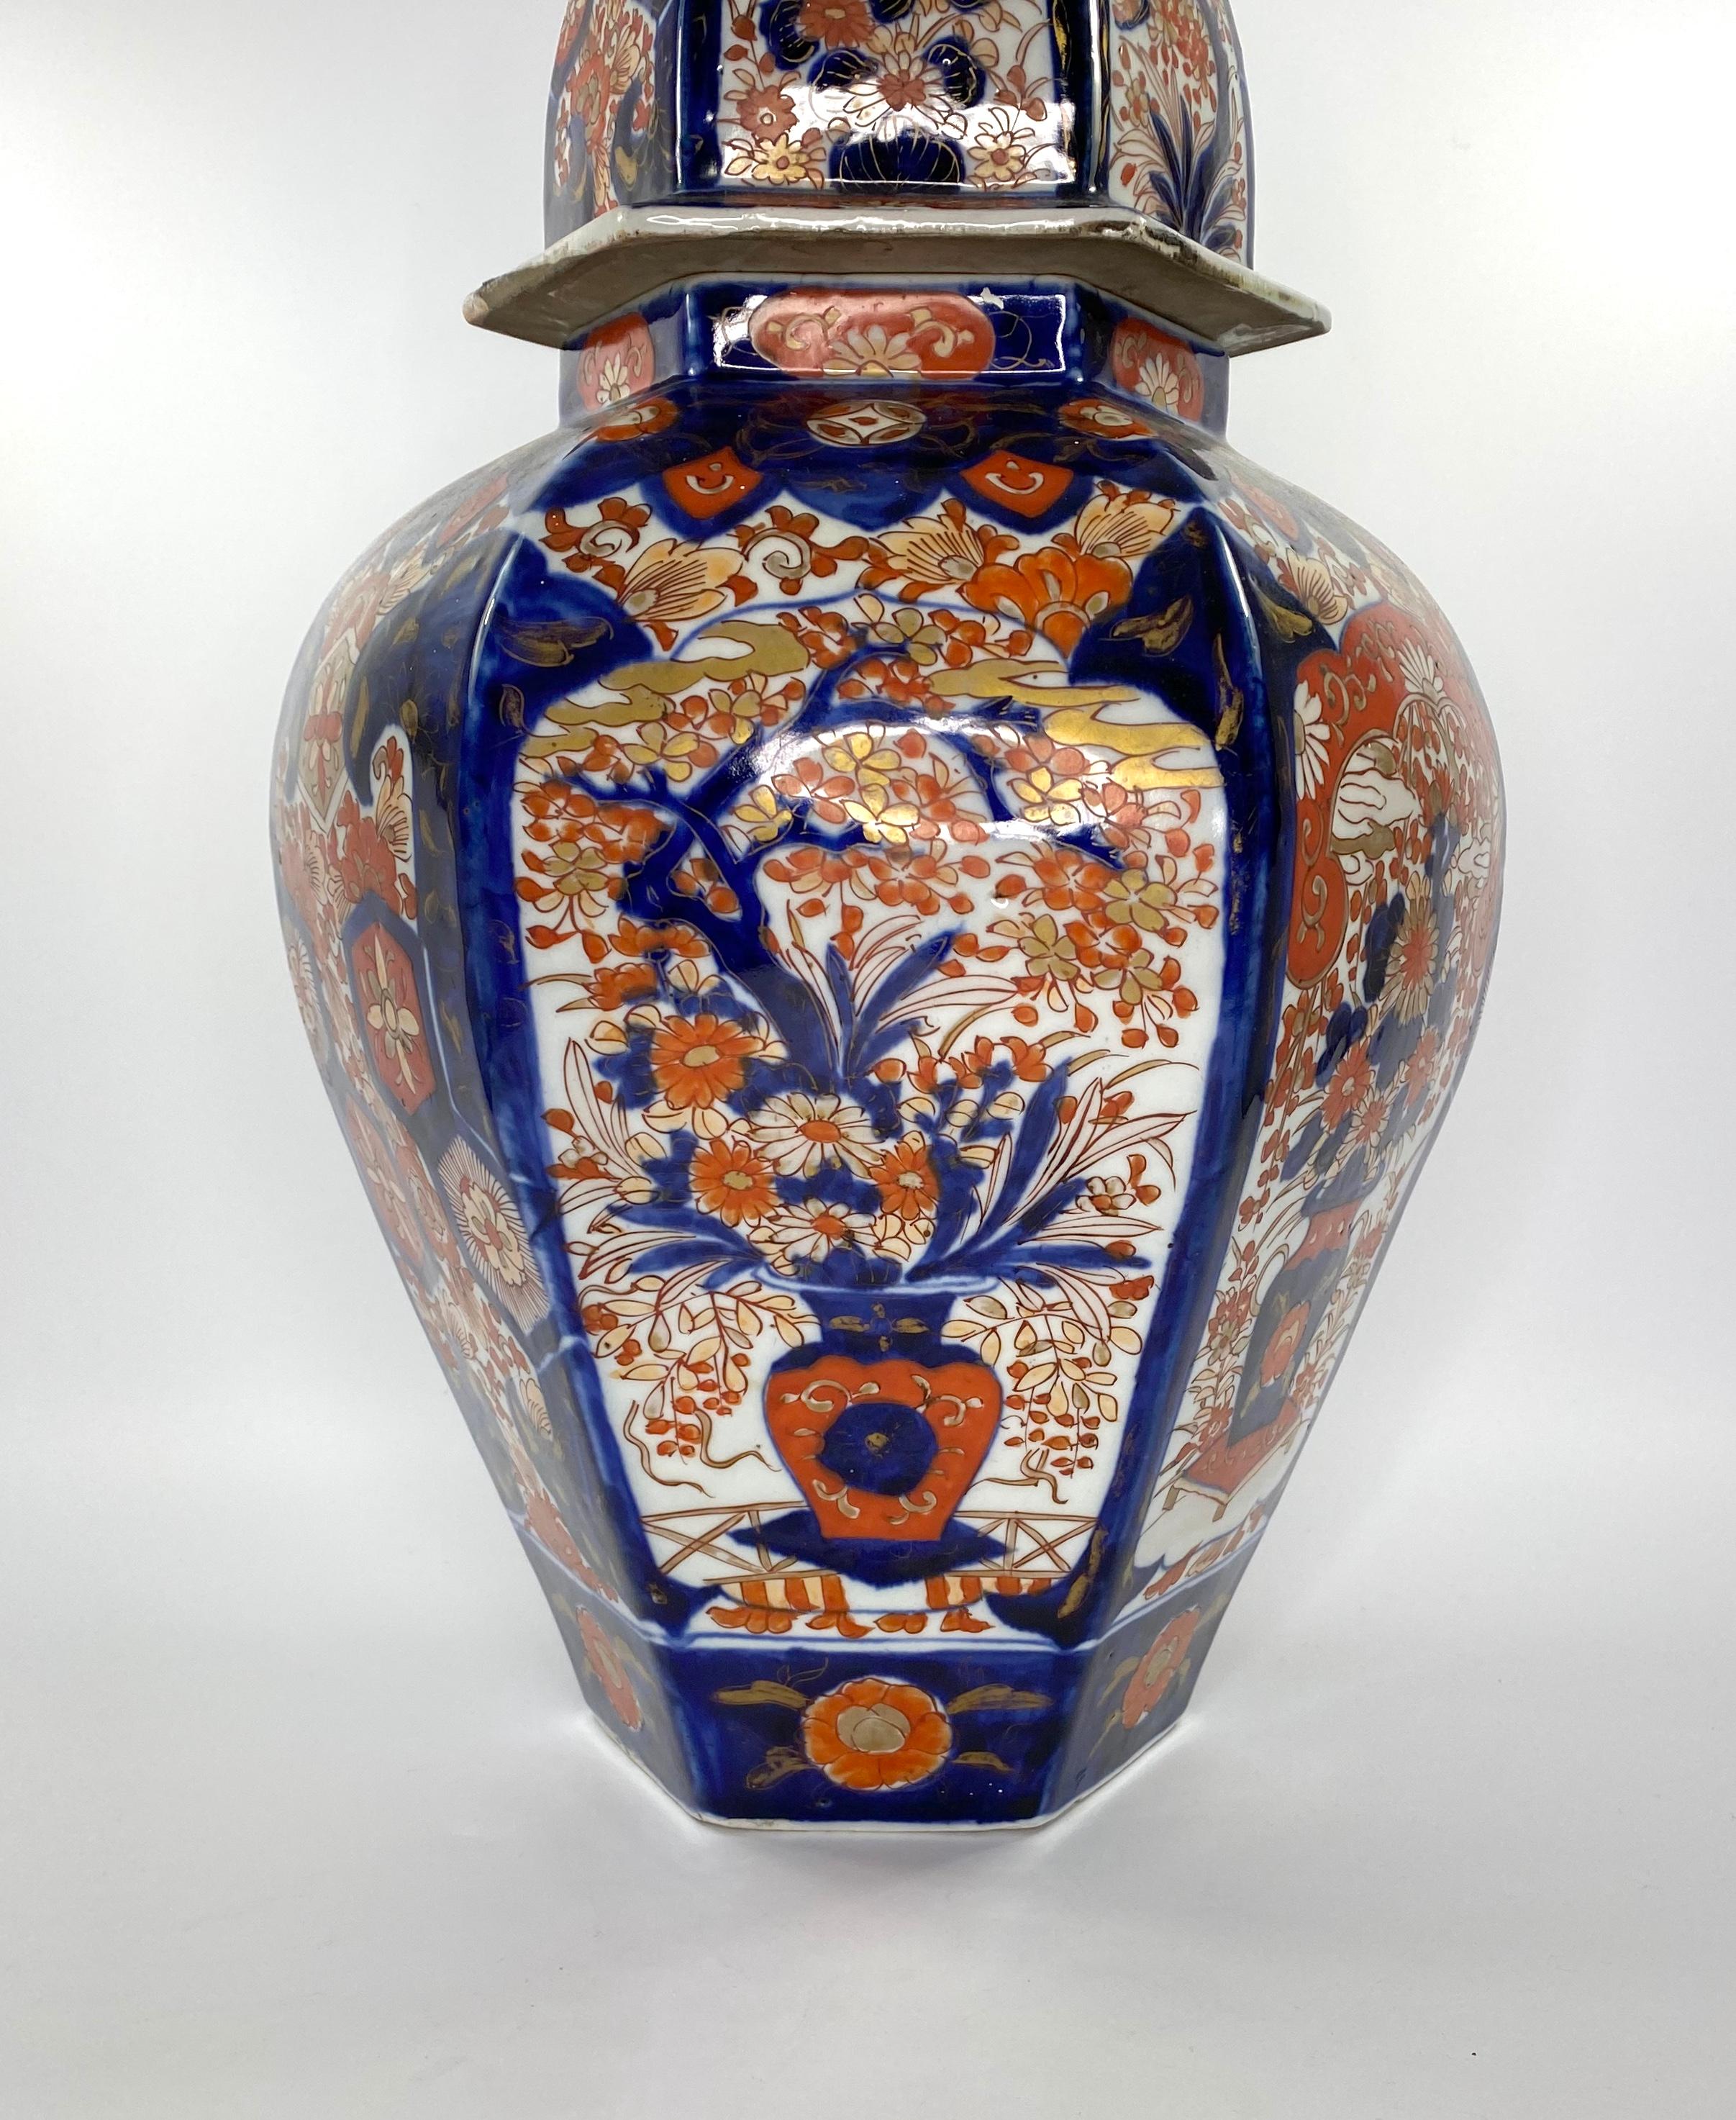 Japanese Imari porcelain vase and cover, circa 1890, Meiji Period. The hexagonal vase, painted with panels of flowering plants in vases, upon a low table.Two further panels of textile motif, upon a flowering ground. Lappet border to the shoulder of